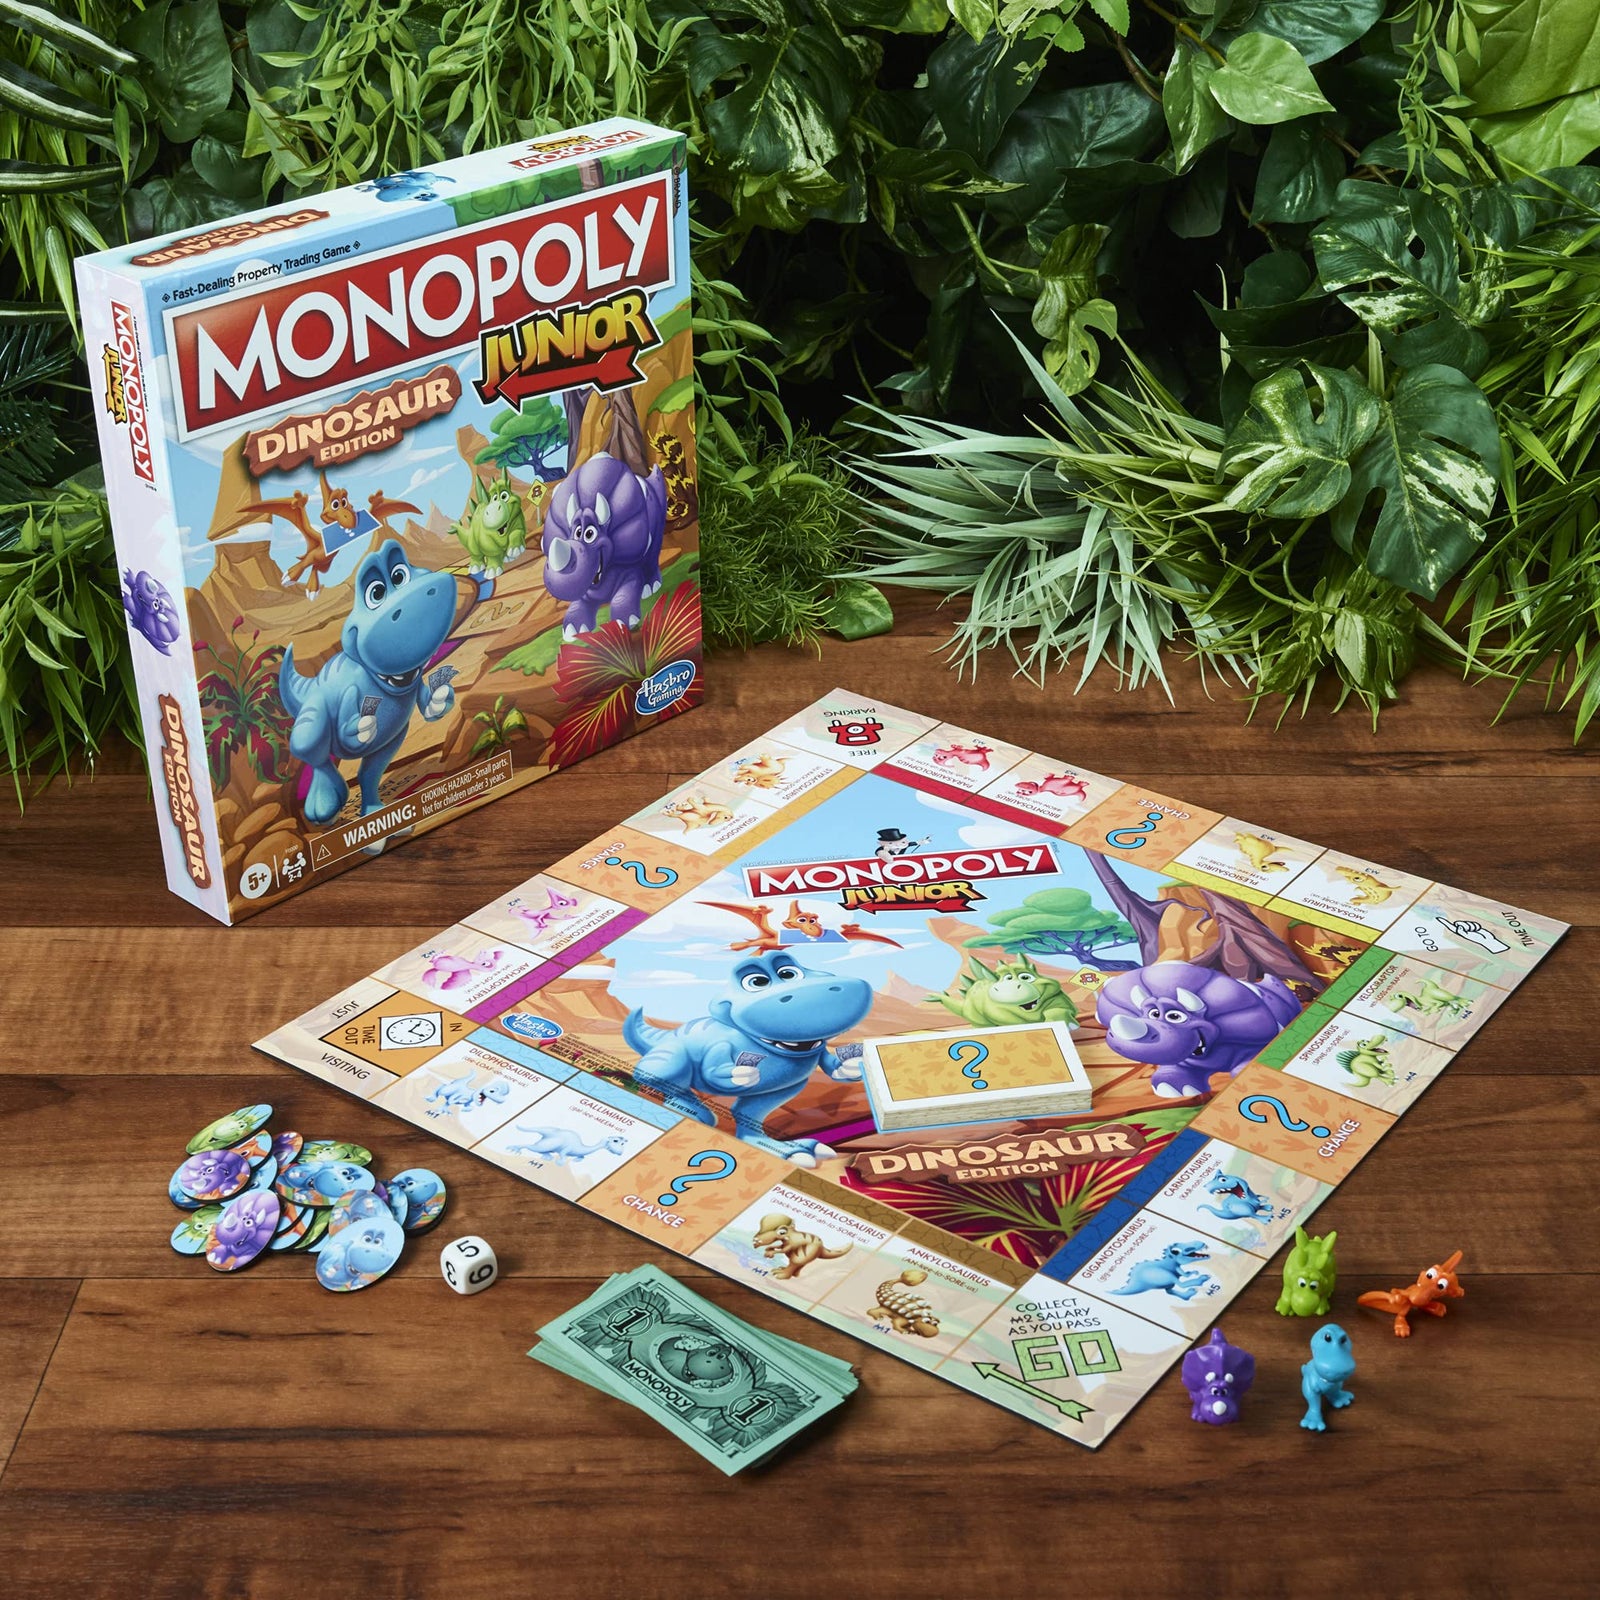 Hasbro Gaming Monopoly Junior: Dinosaur Edition Board Game for 2-4 Players, Fun Indoor Games for Kids Ages 5 and Up, Dinosaur Theme (Amazon Exclusive)